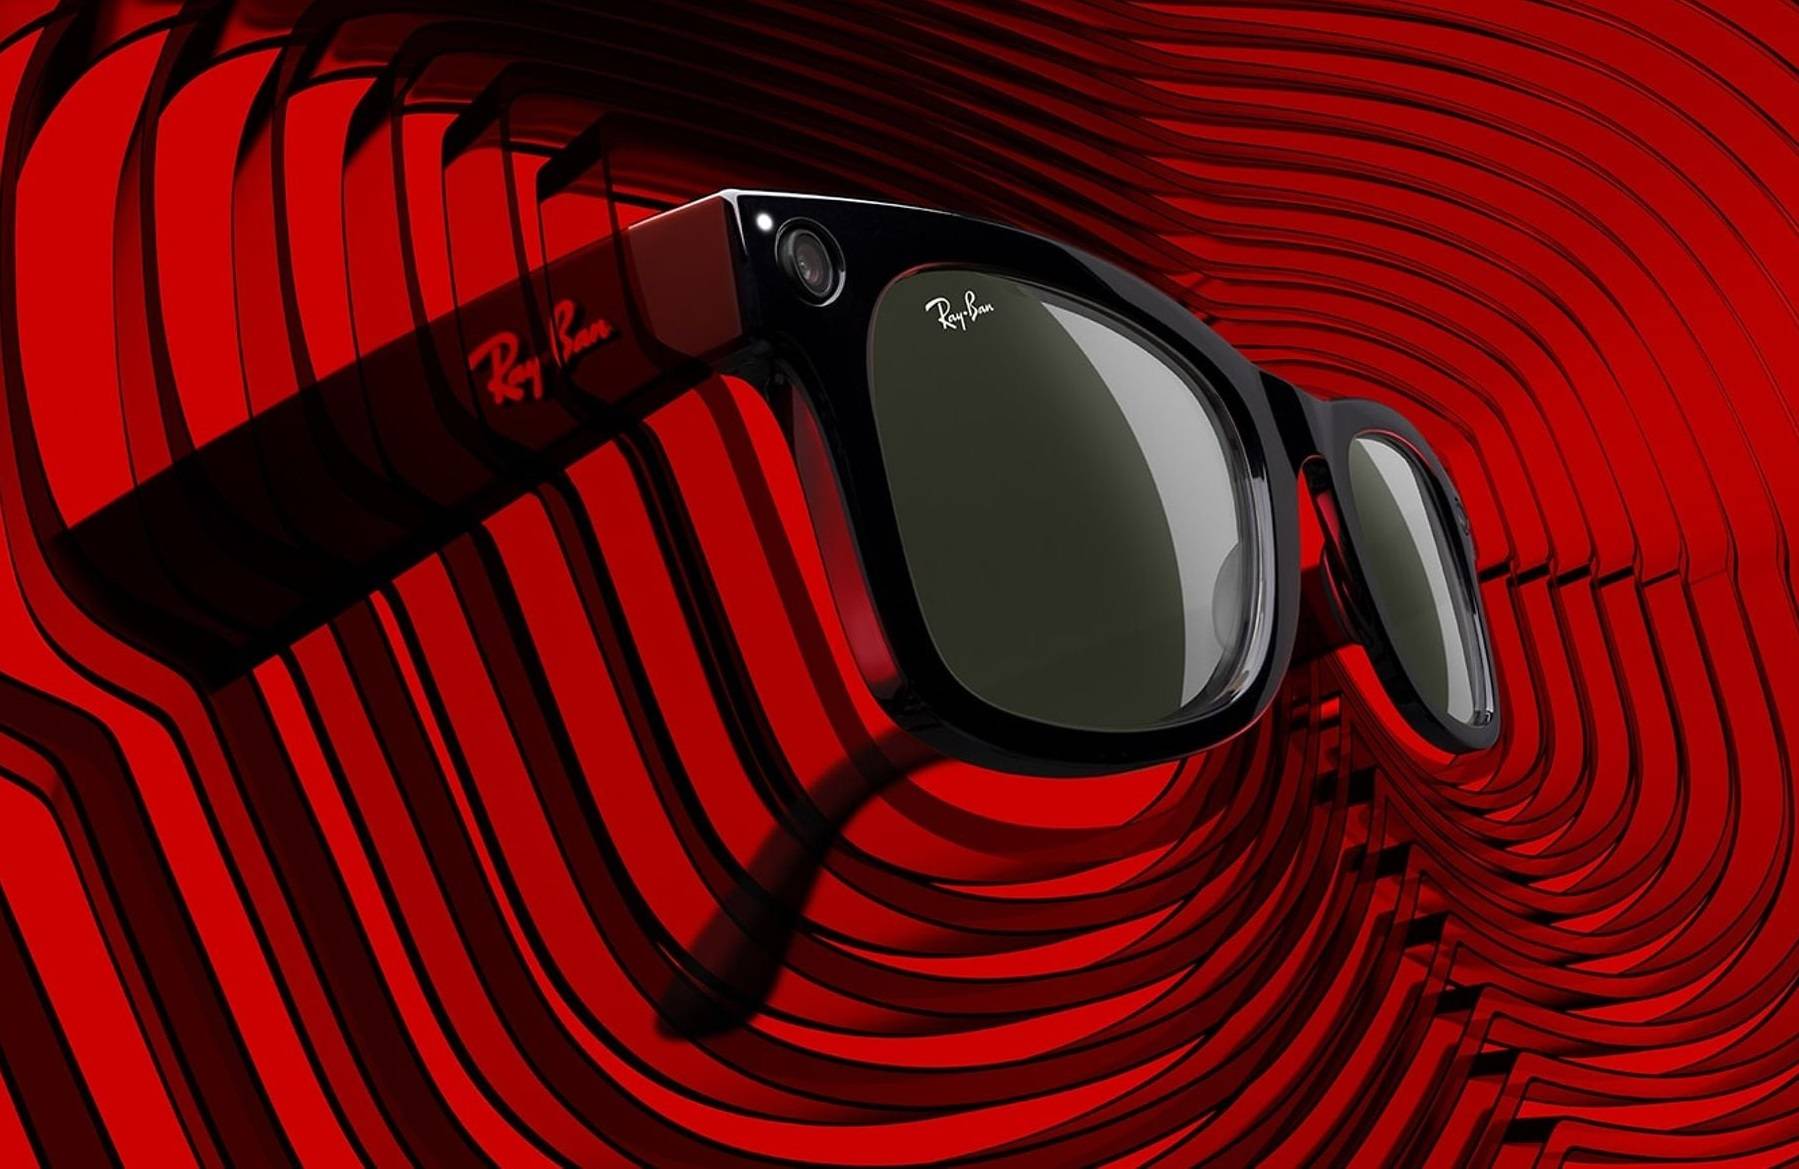 Ray-Ban Stories: A Vital Stepping Stone to Full AR